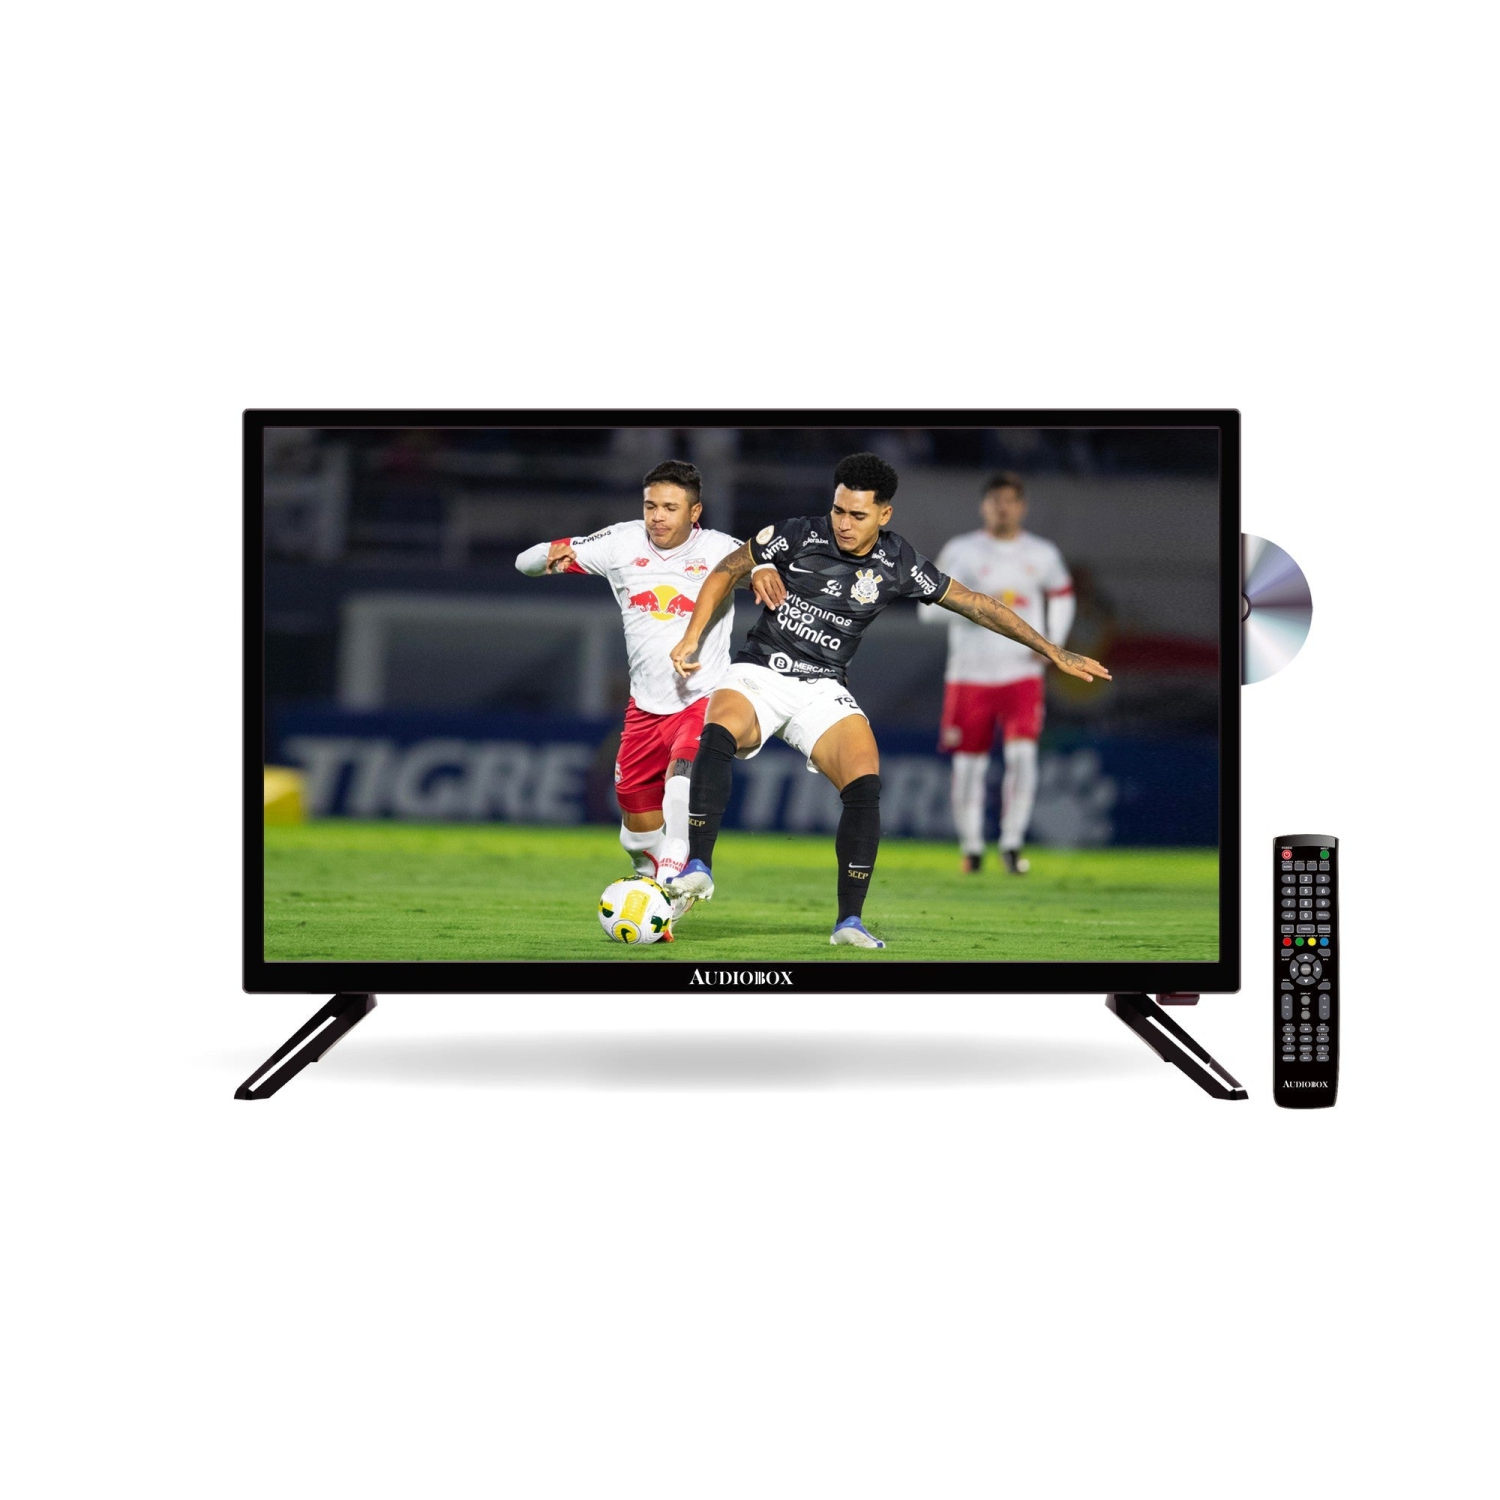 Audiobox TV-32D 32" HDTV with DVD Player and HDMI